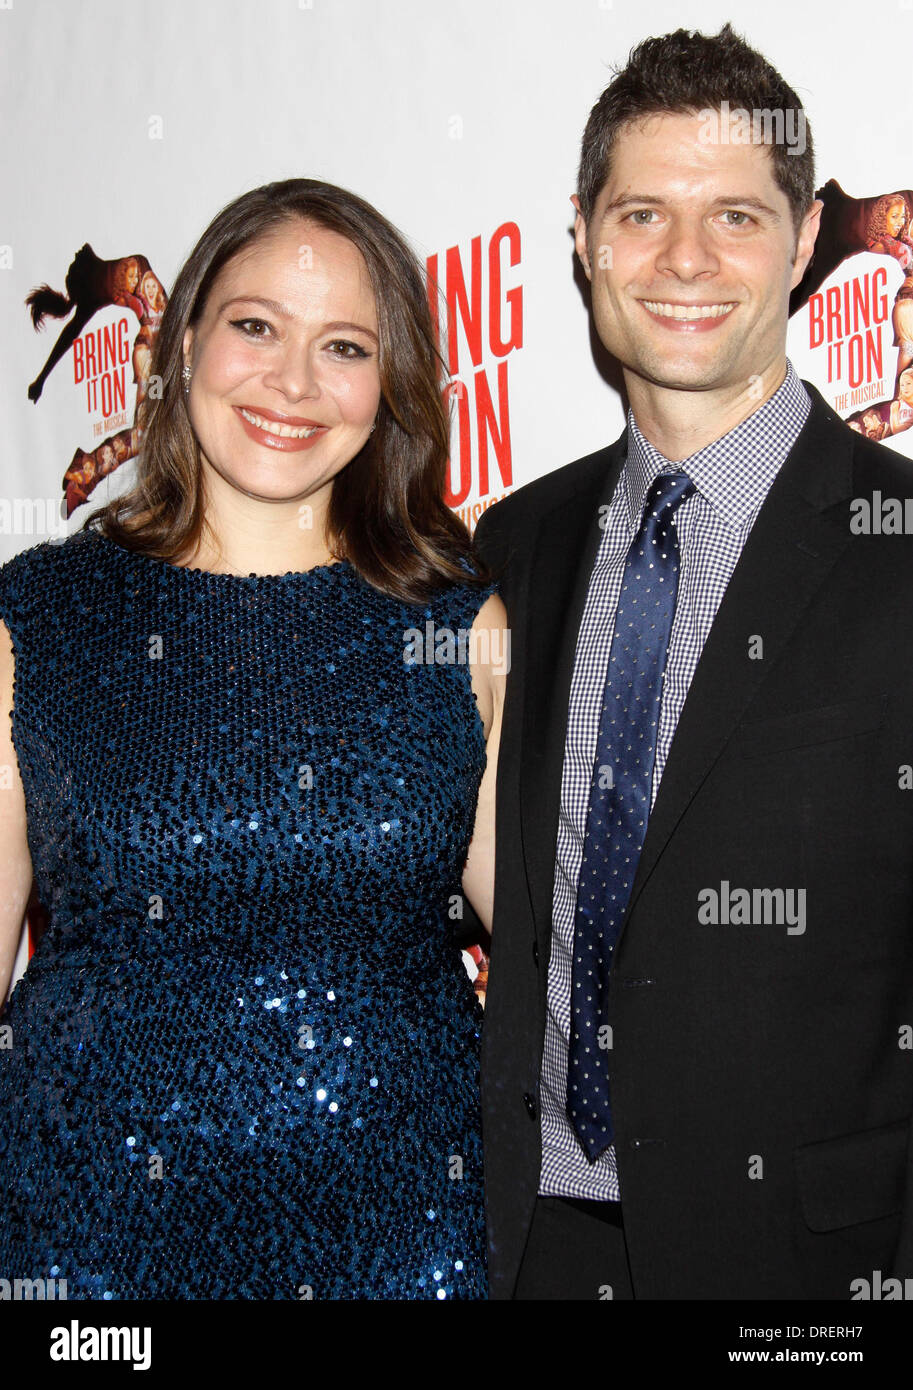 Rita Pietropinto and Tom Kitt Broadway opening night of 'Bring It On The  Musical' at the Saint James Theatre - Arrivals New York City, USA -  01.08.12 Stock Photo - Alamy